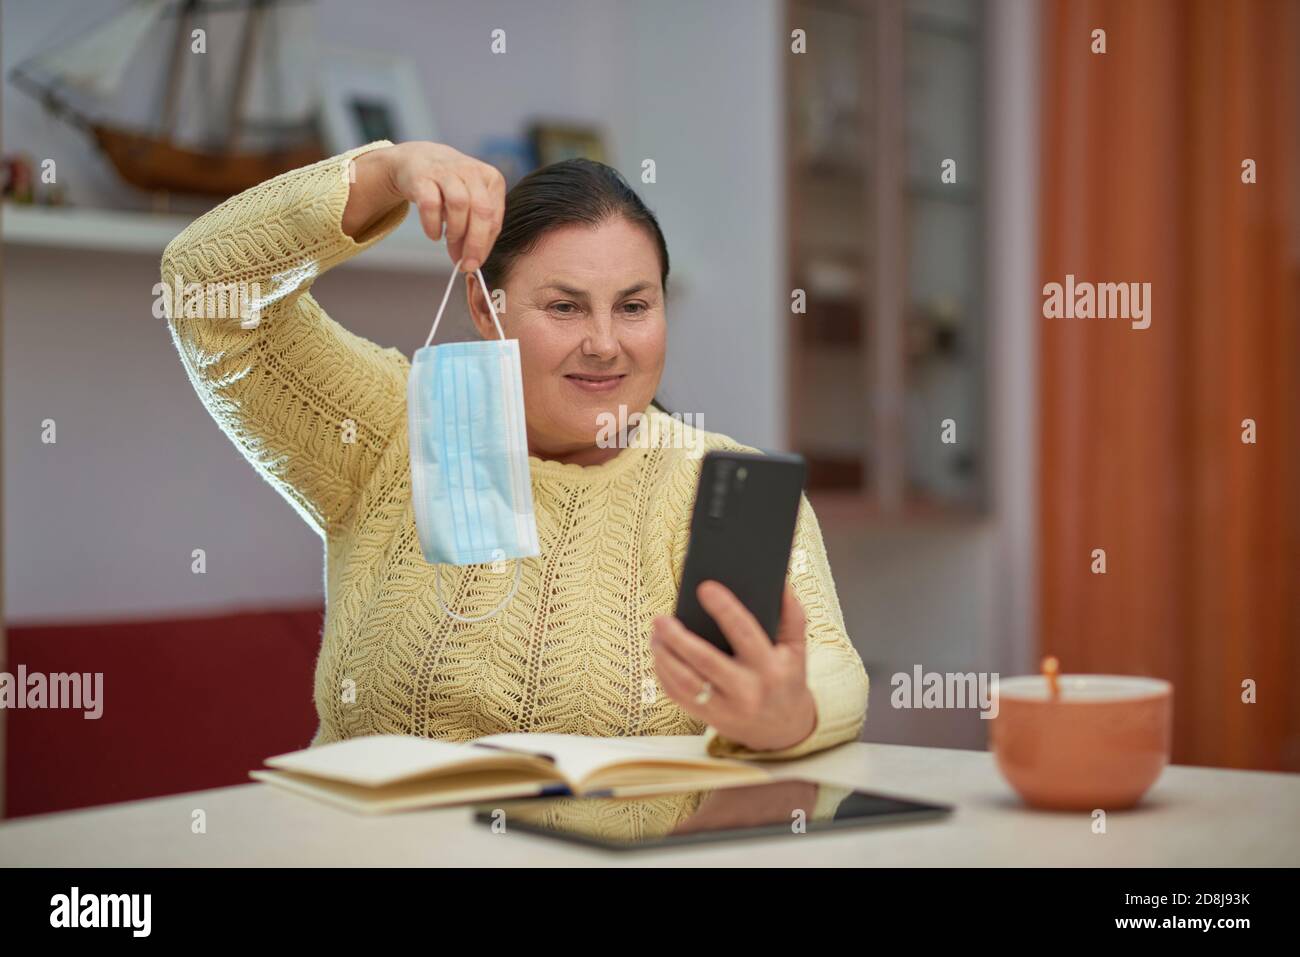 Senior woman looking at smartphone showing blue mask Stock Photo